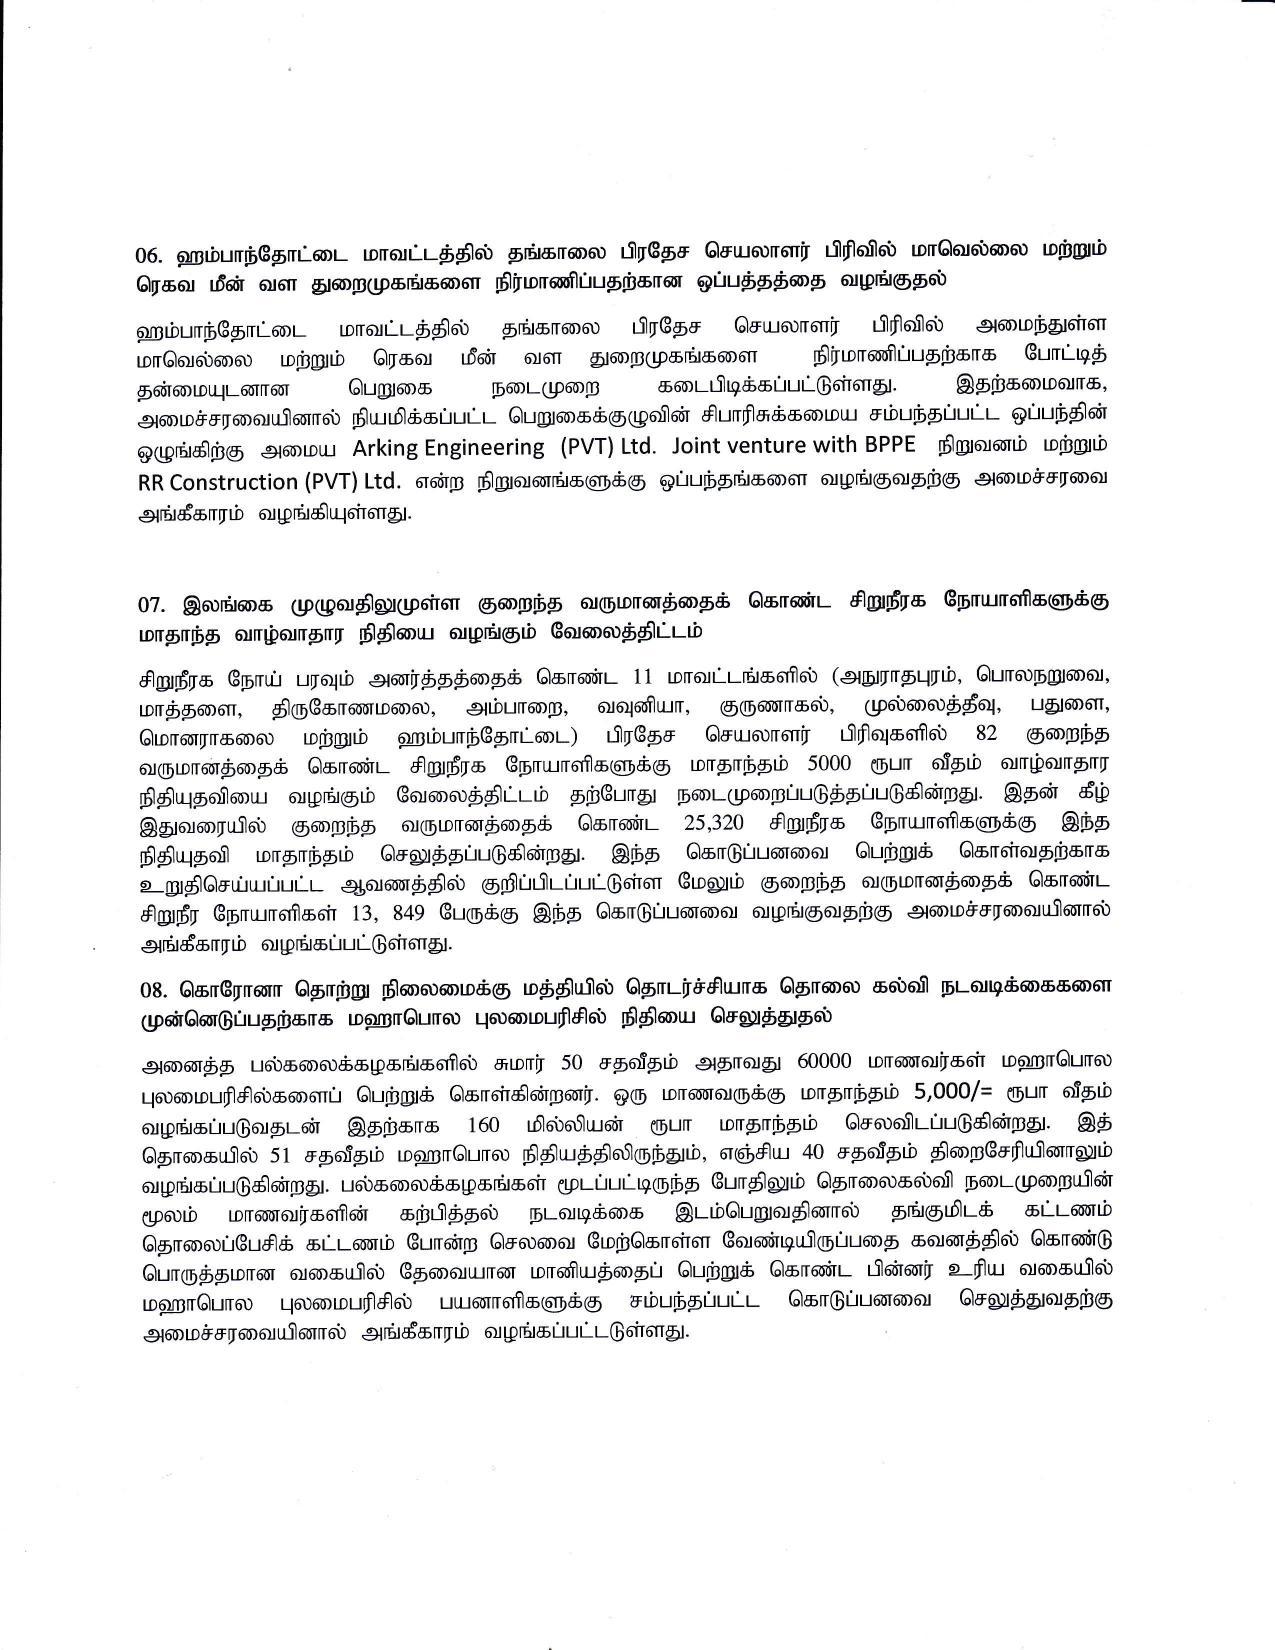 Tamil Cabinet 11.06.20 min page 003